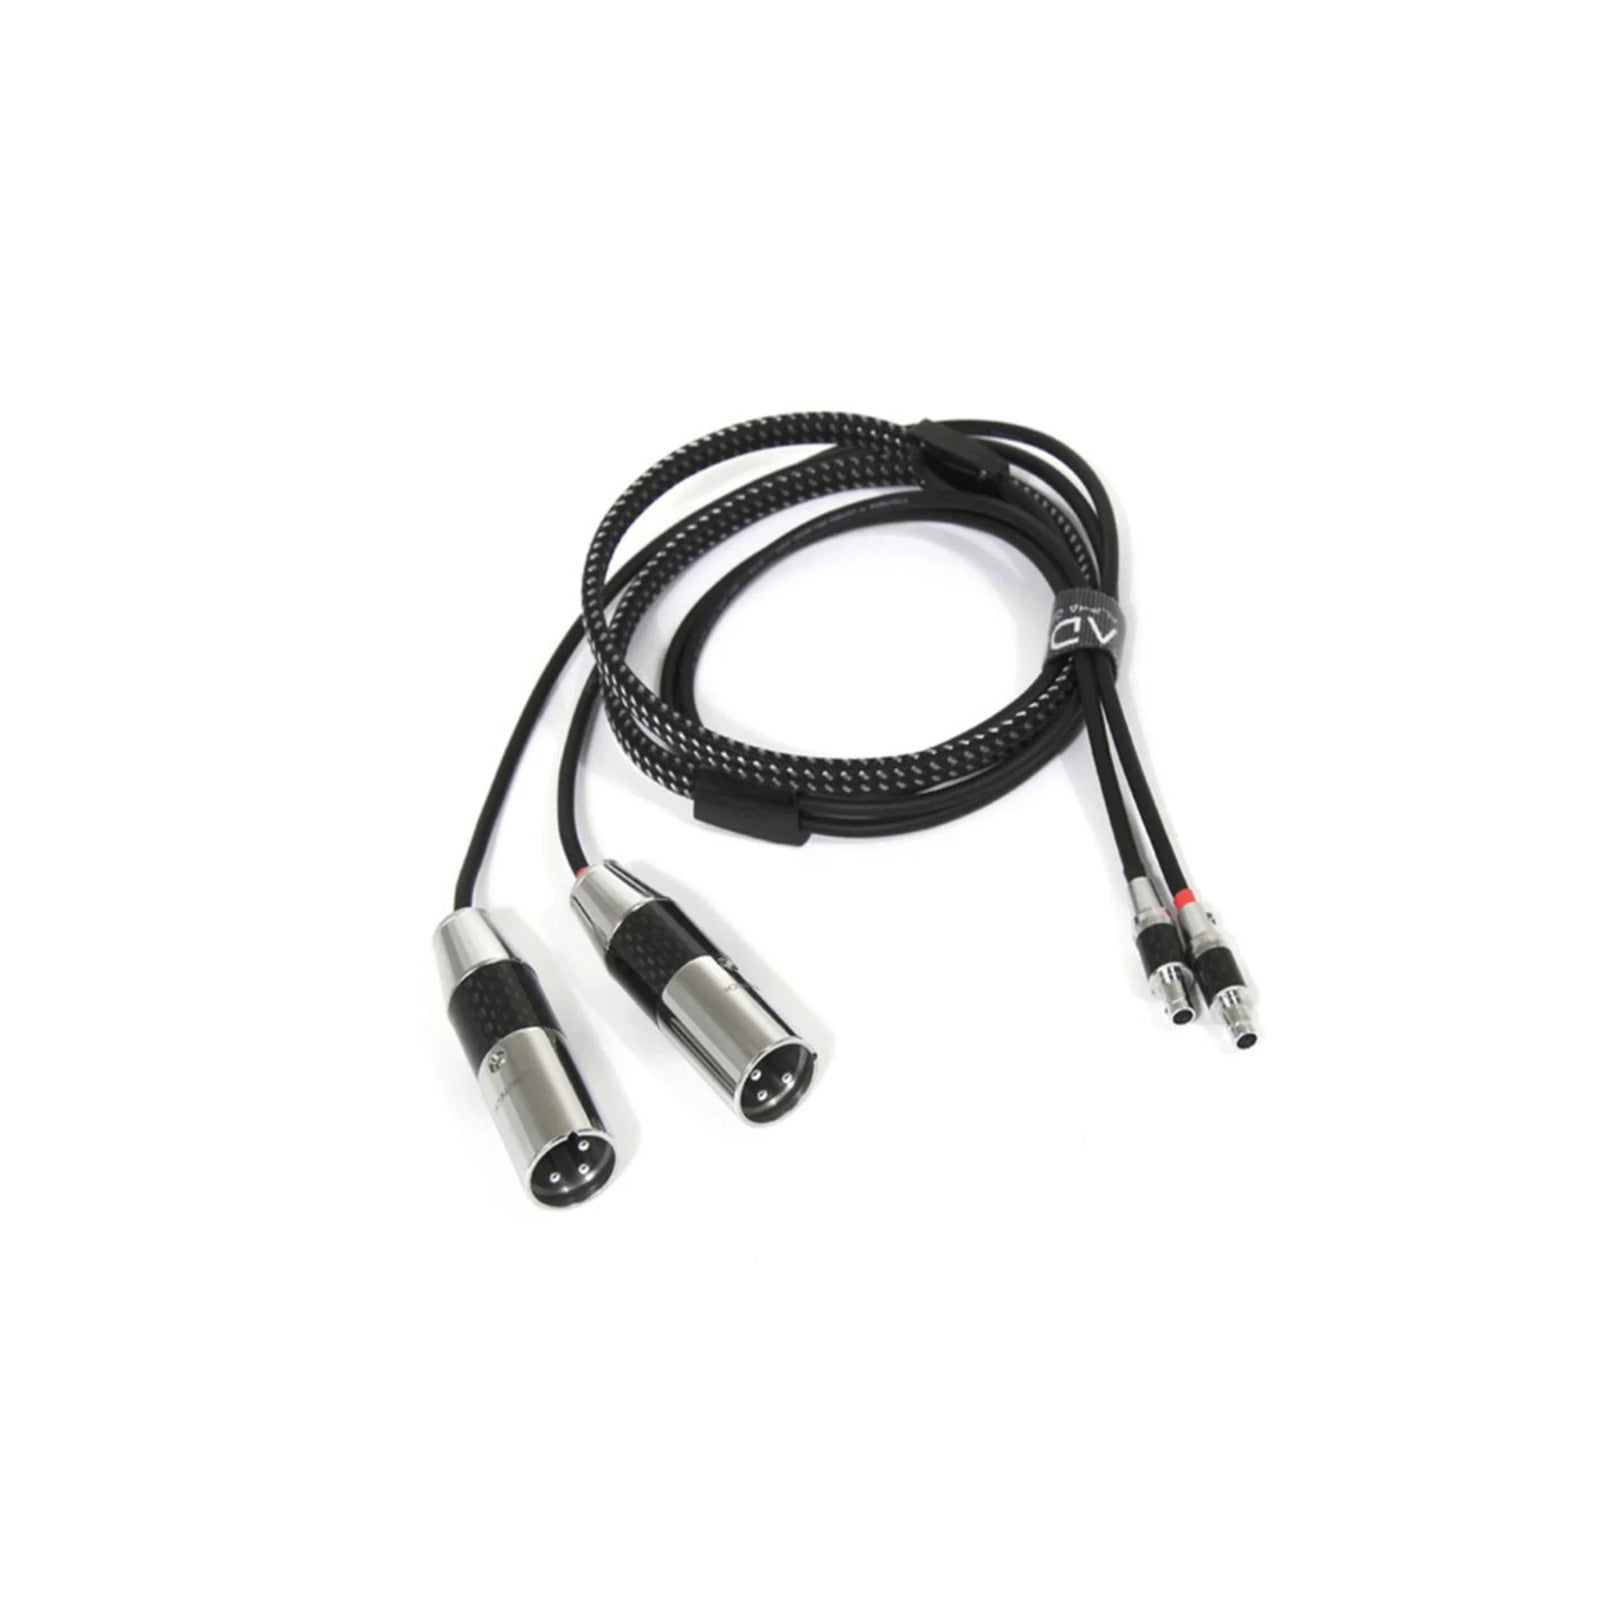 ALPHA DESIGN LABS HEADPHONE CABLE iHP-35Hx-1.3m Headphone Cable 6.3mm stereo to connector for Sennheiser HD-800 (1.3M) iHP-35Hx-3.0m Headphone Cable 6.3mm stereo to connector for Sennheiser HD-800 (3.0M) iHP-35Hx-XLR-1.3m Headphone Cable XLR to connector for Sennheiser HD-800 (1.3M) iHP-35Hx-XLR-3.0m Availabe at Vinyl Sound